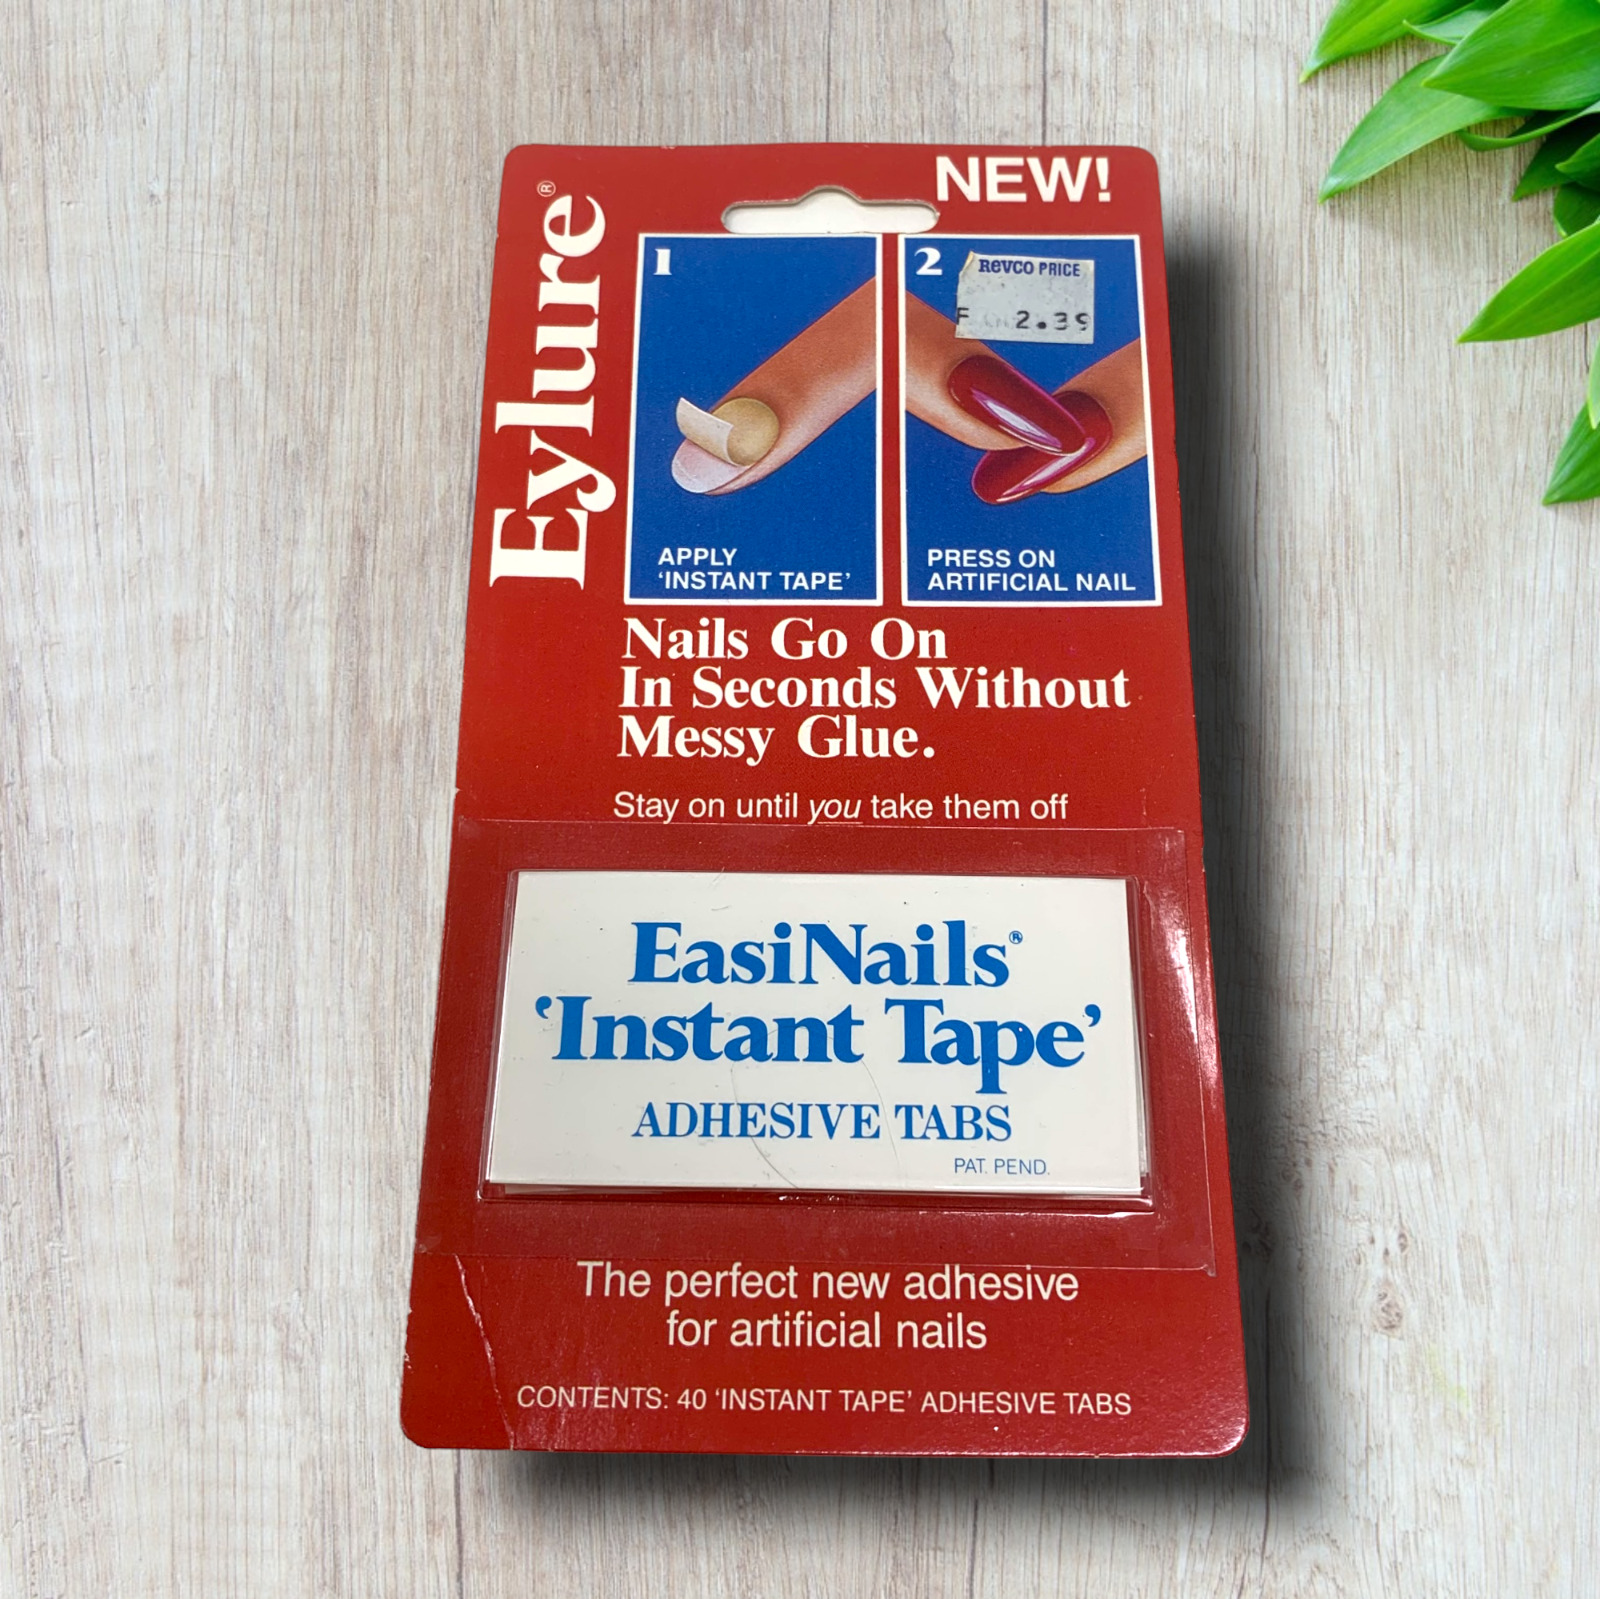 Vintage 1980's Eylure EasiNails Instant Tape No Messy Glue TV Movie Prop Revco